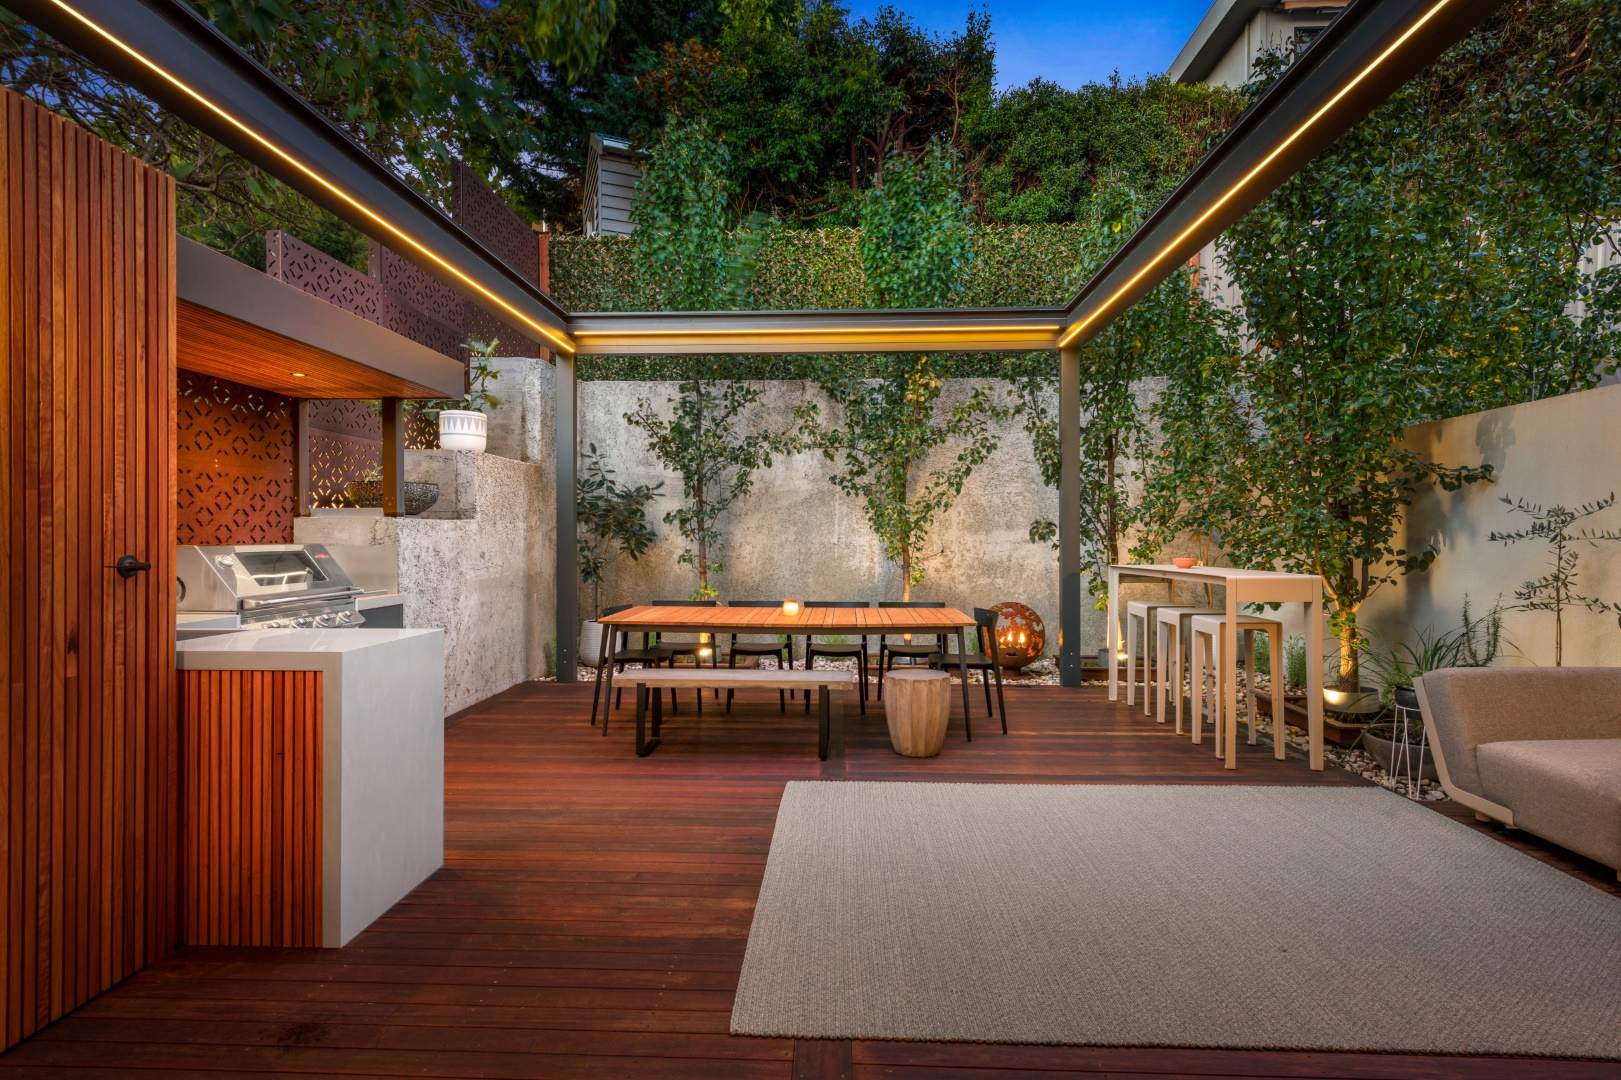 17 Inspiring Contemporary Deck Designs for Your Outdoor Oasis